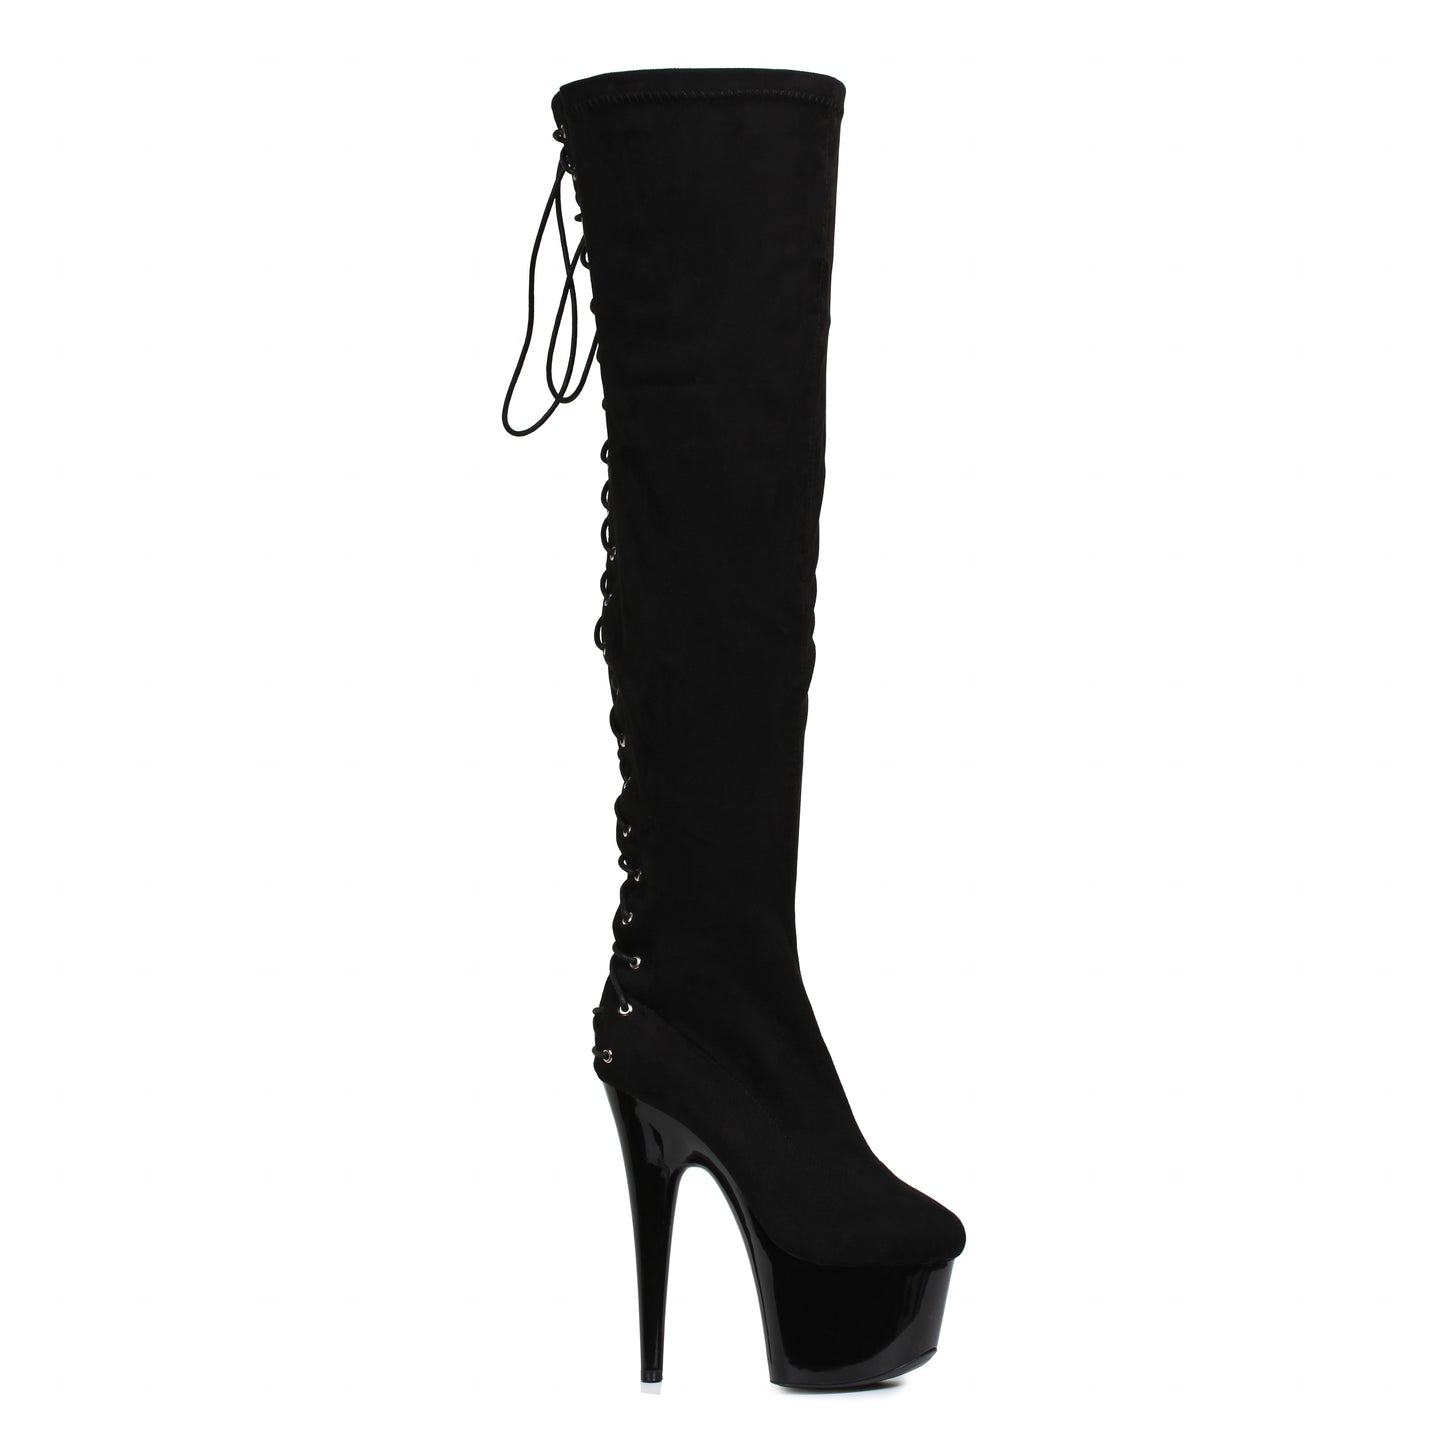 609-FARE Ellie Shoes 6" Thigh High Boot EXTENDED S 6 INCH HEEL THIGH HIGH